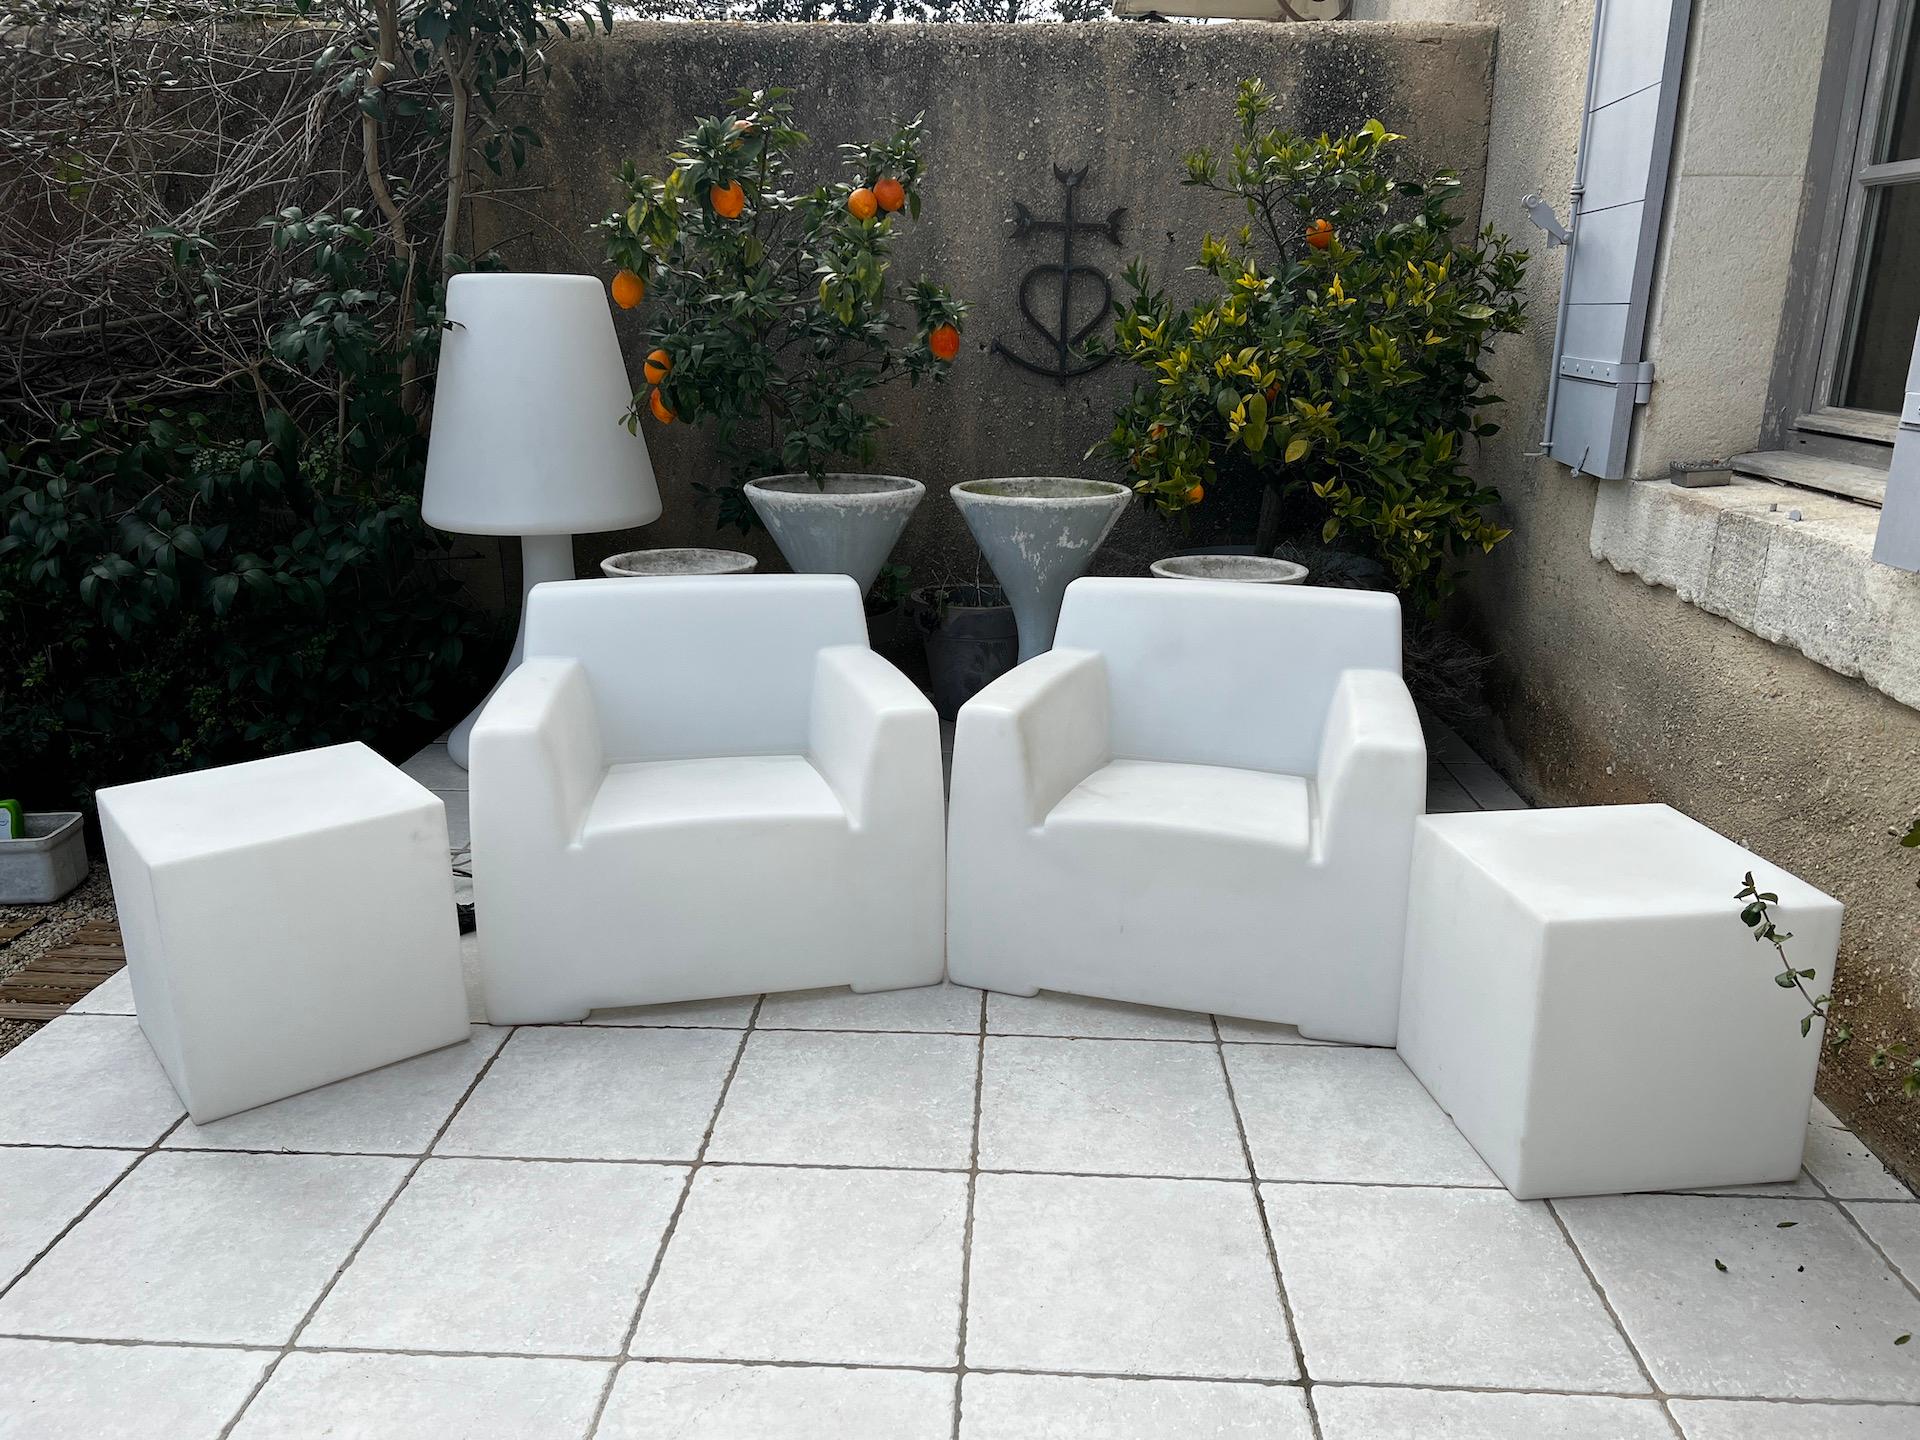 Garden set Paola Navone for Gervasoni including 2 armchairs and 2 plastic cubes in white opaline and white polyethylene. 
Armchairs : Height. 65 x Width. 72 x Depth. 72 cm 
Cube : Height. 43 x Width. 43 x Depth. 43 cm.